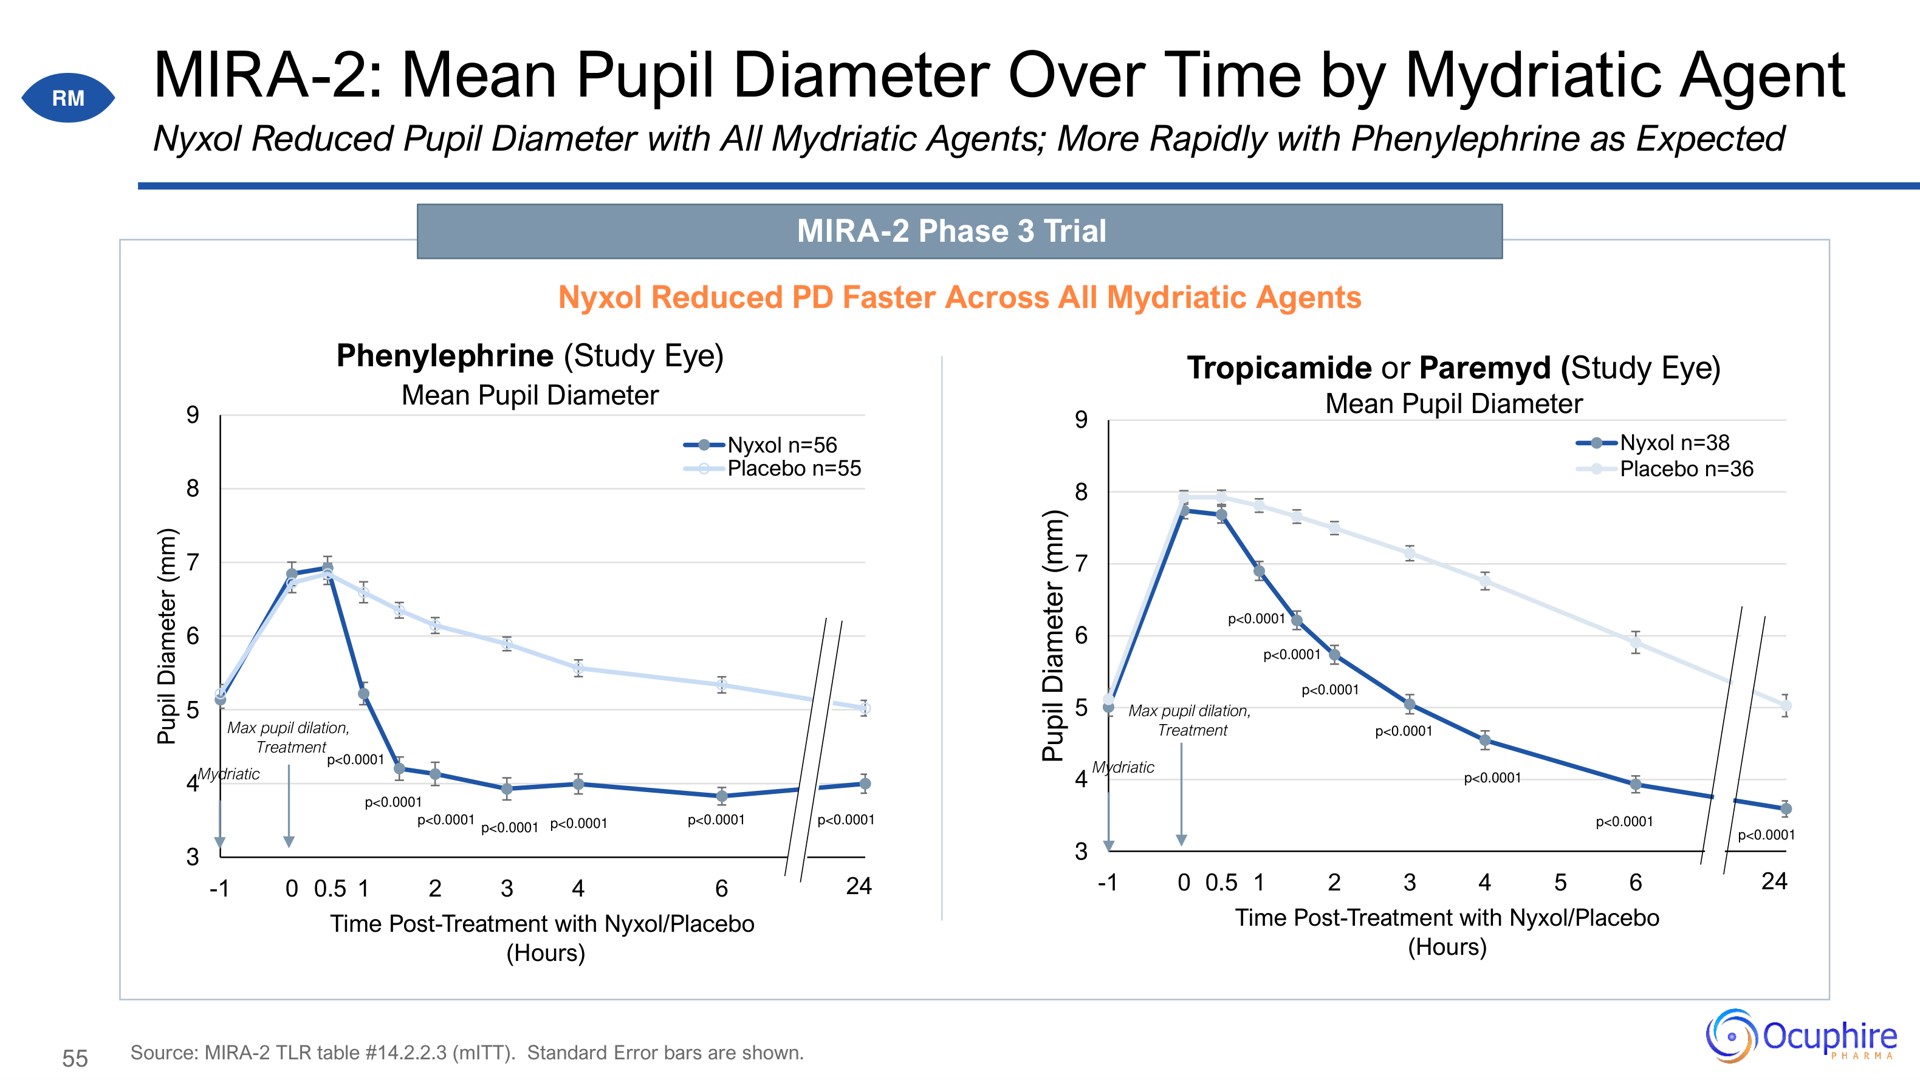 mean pupil diameter over time by mydriatic agent | Ocuphire Pharma